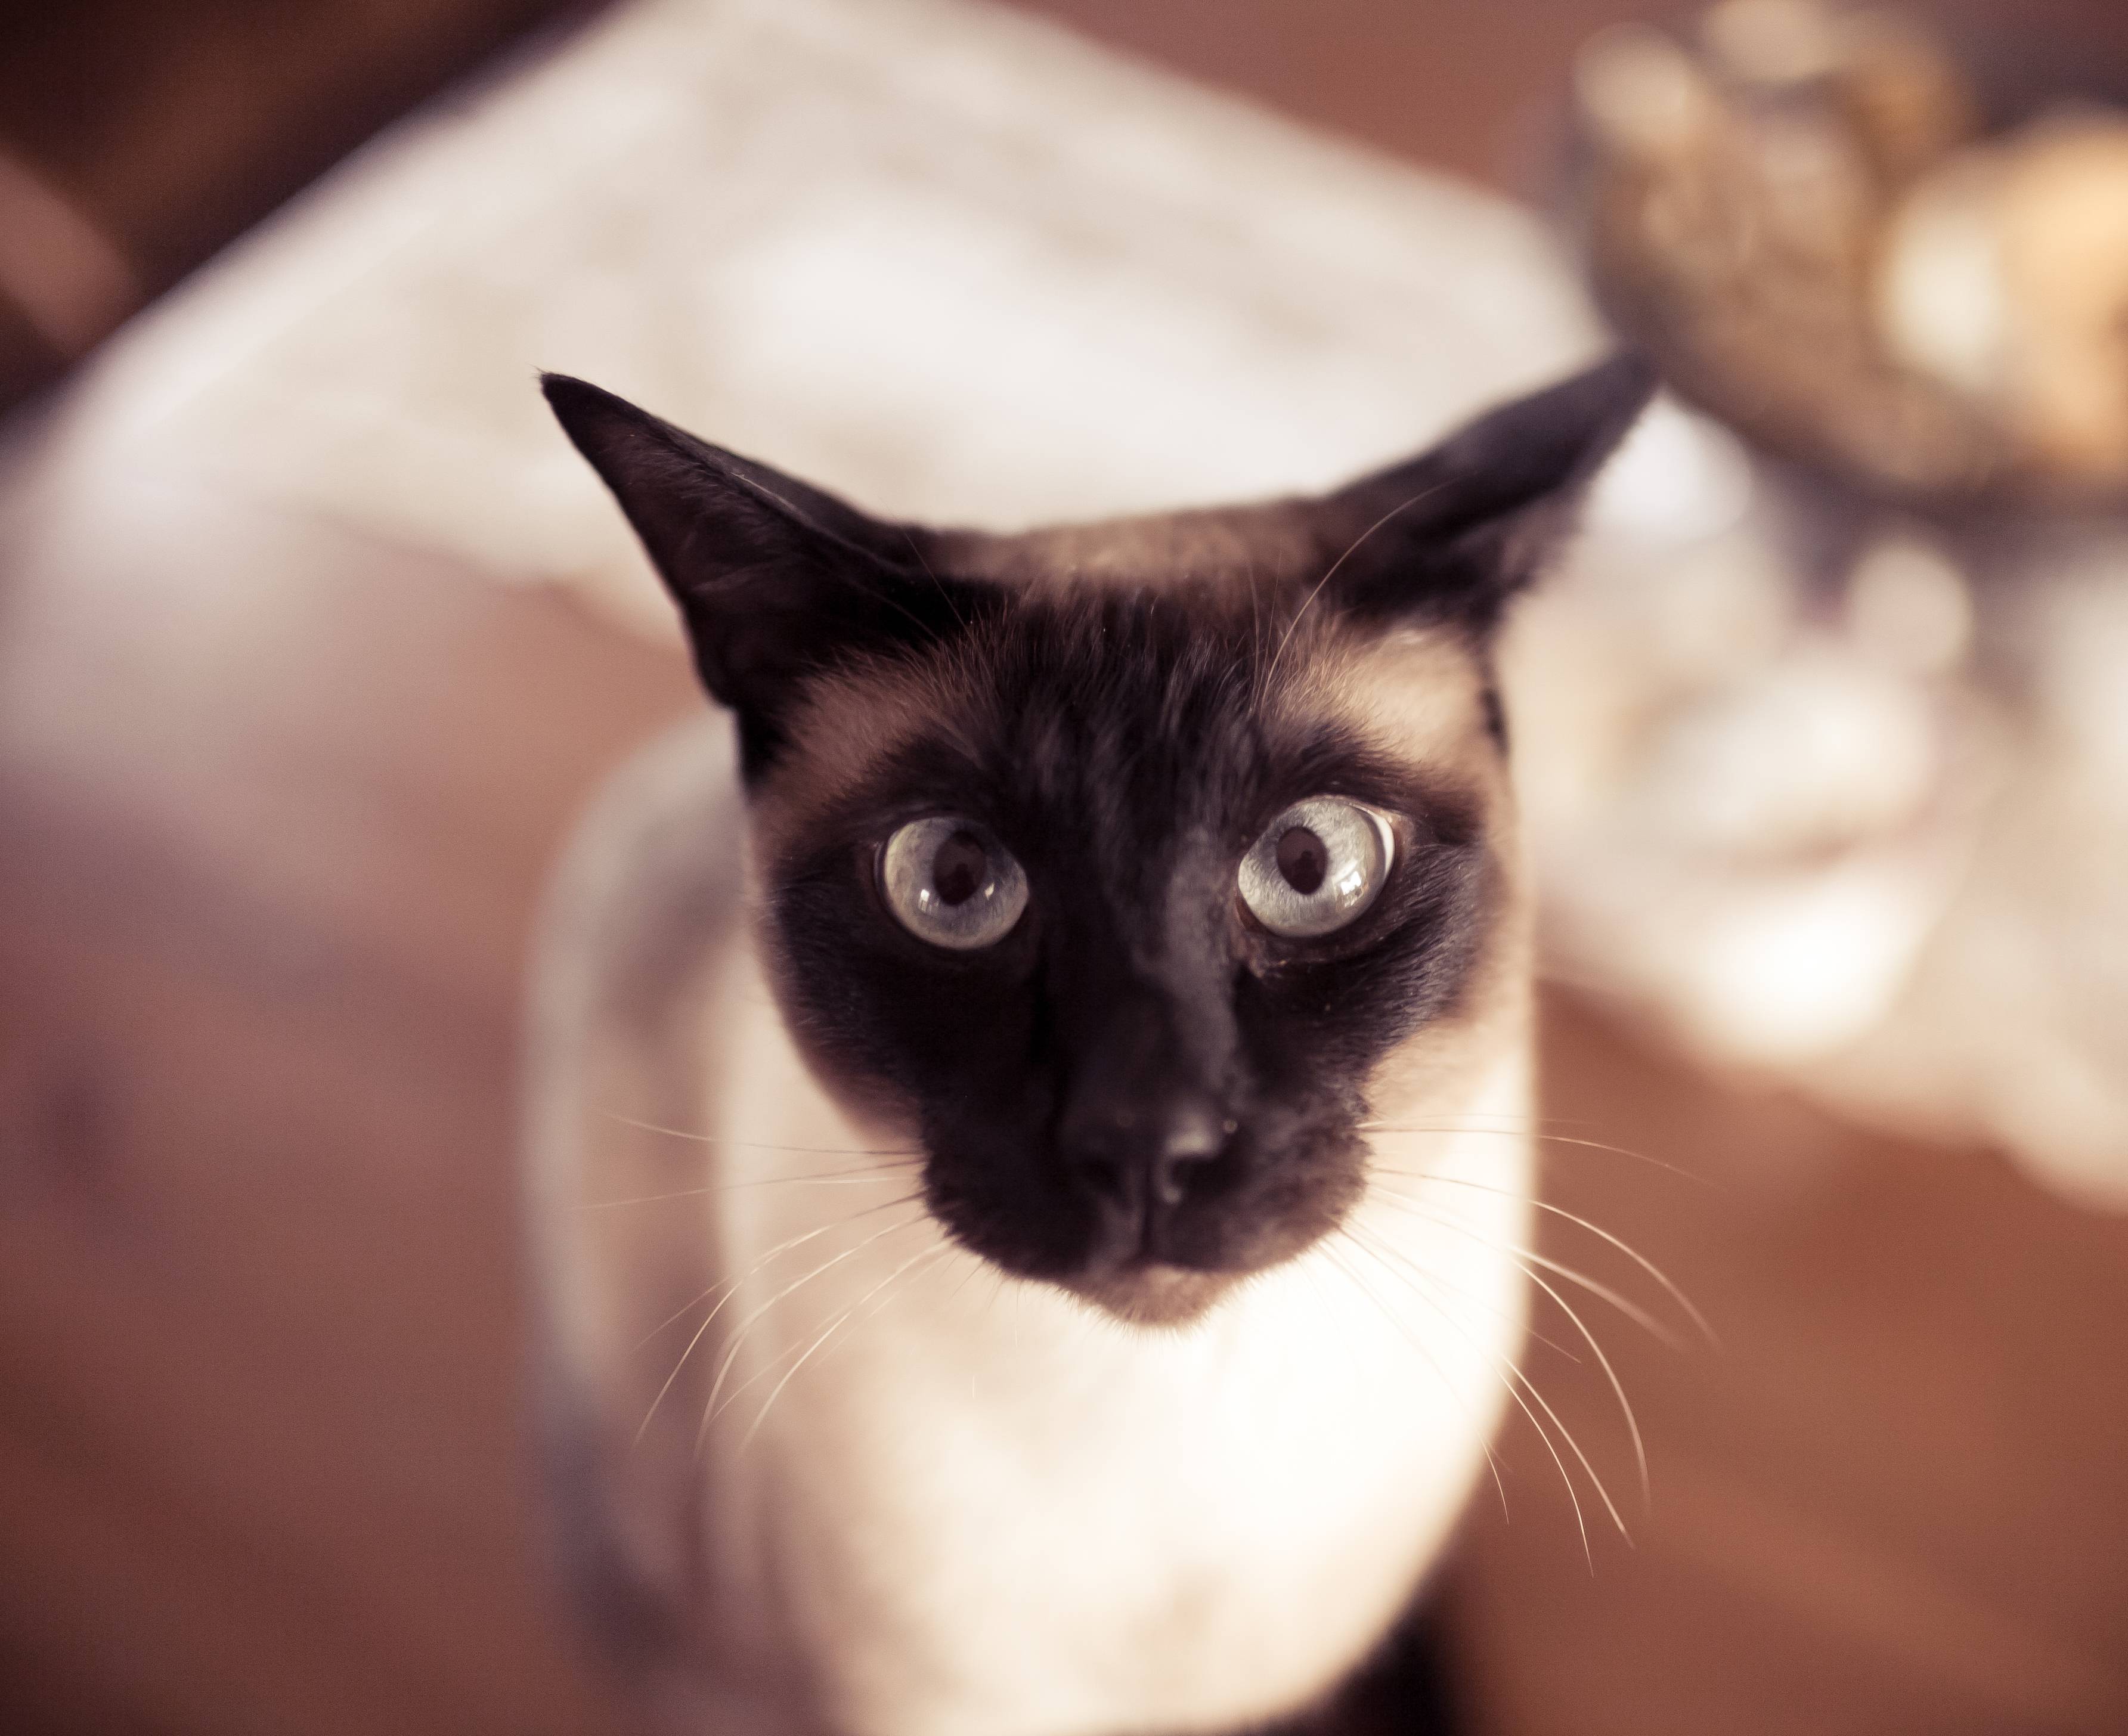 Funny Siamese cat wallpaper and image, picture, photo